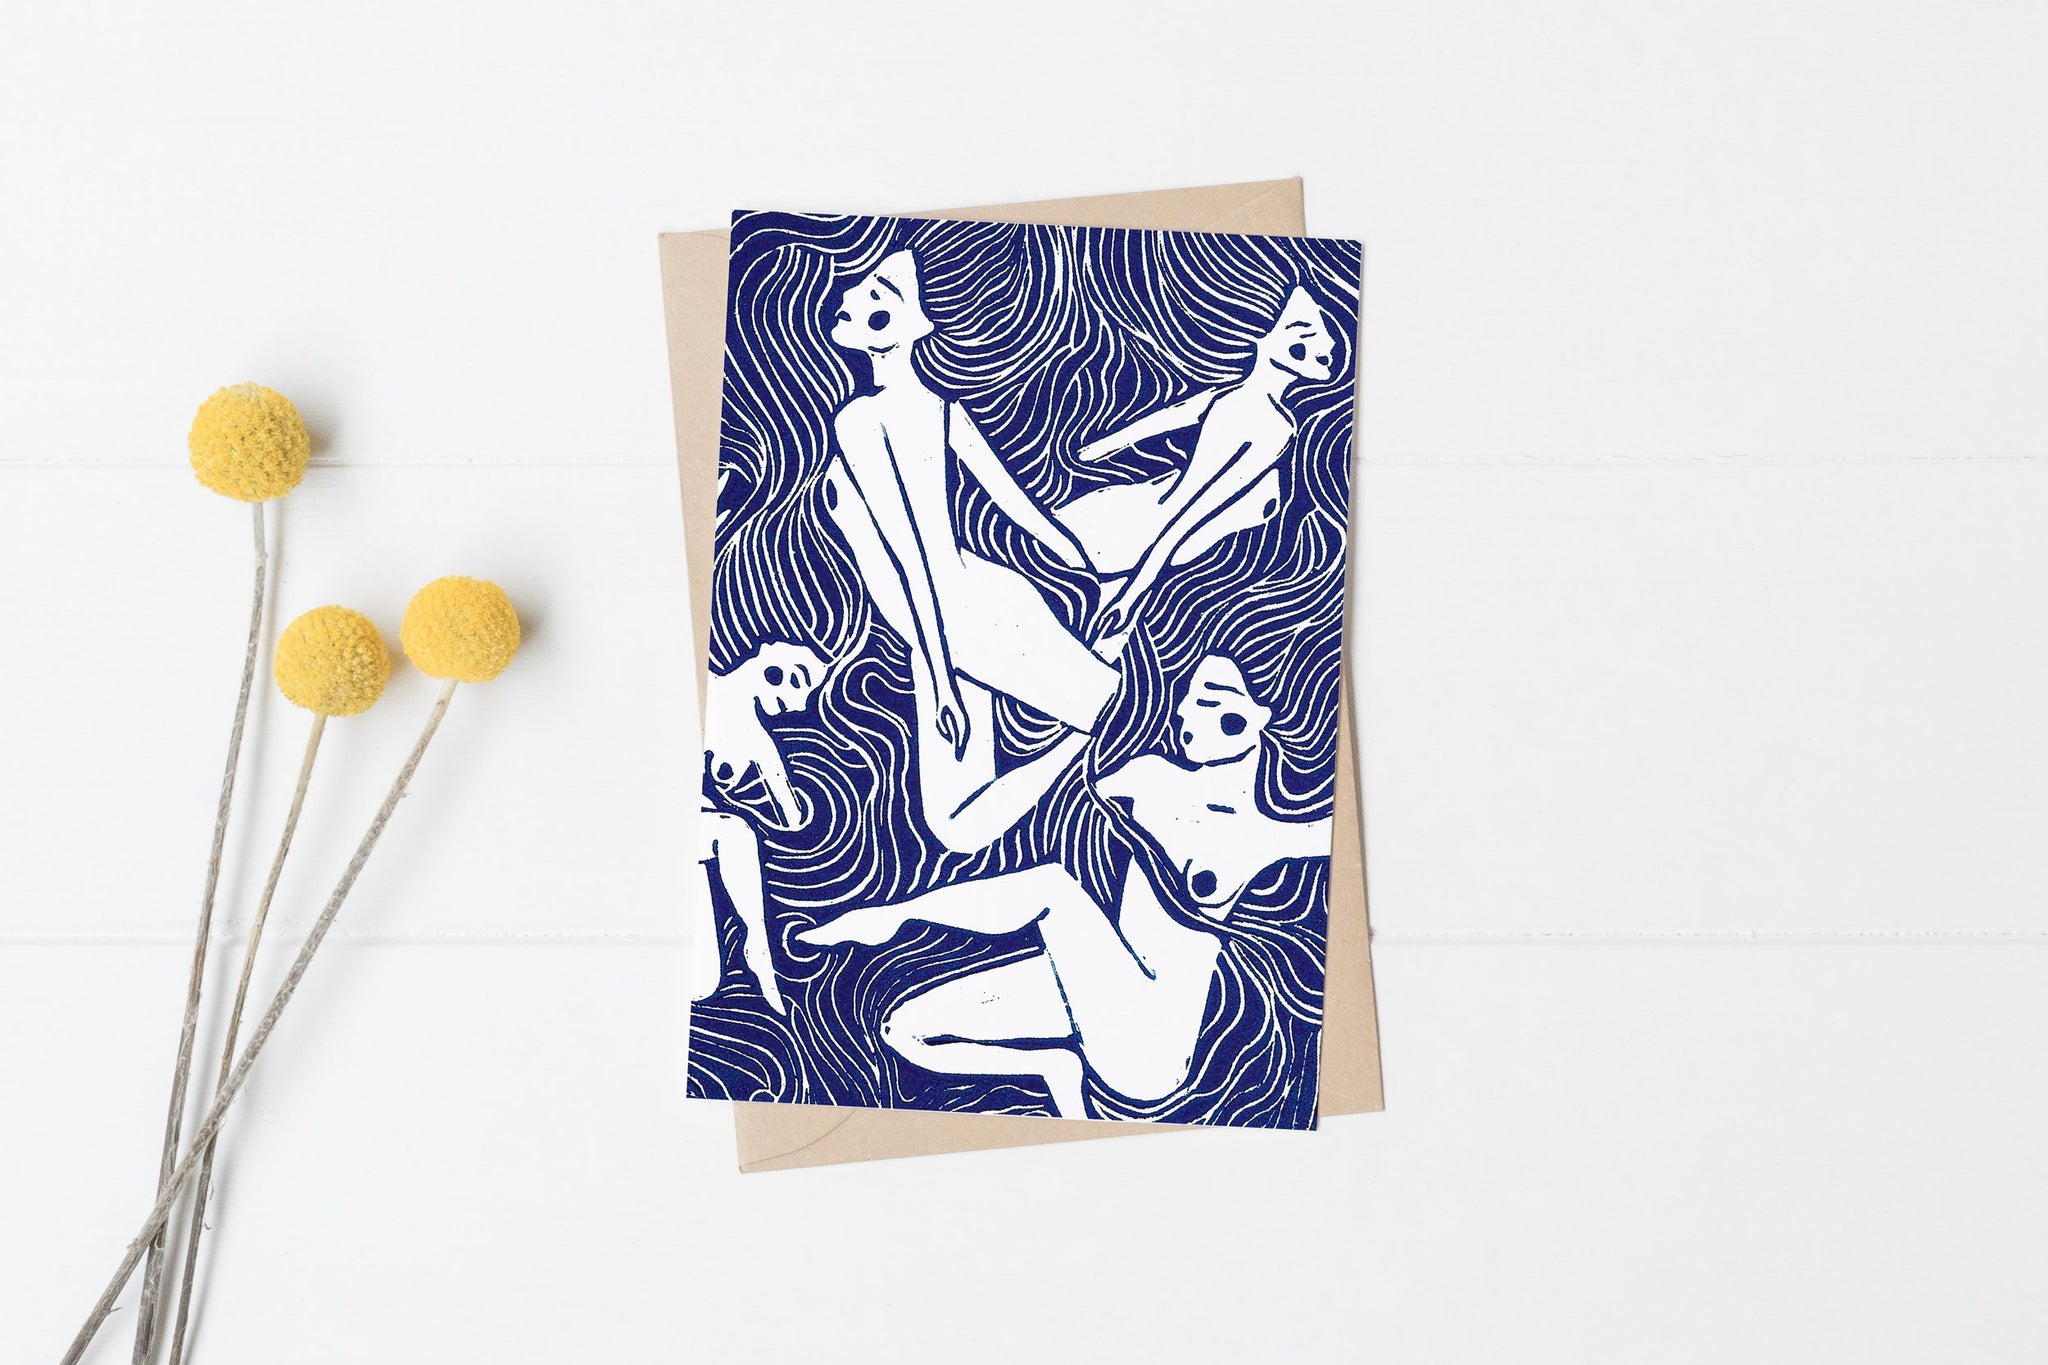 'Wild Swimmers' Greeting Card - Prints by the Bay